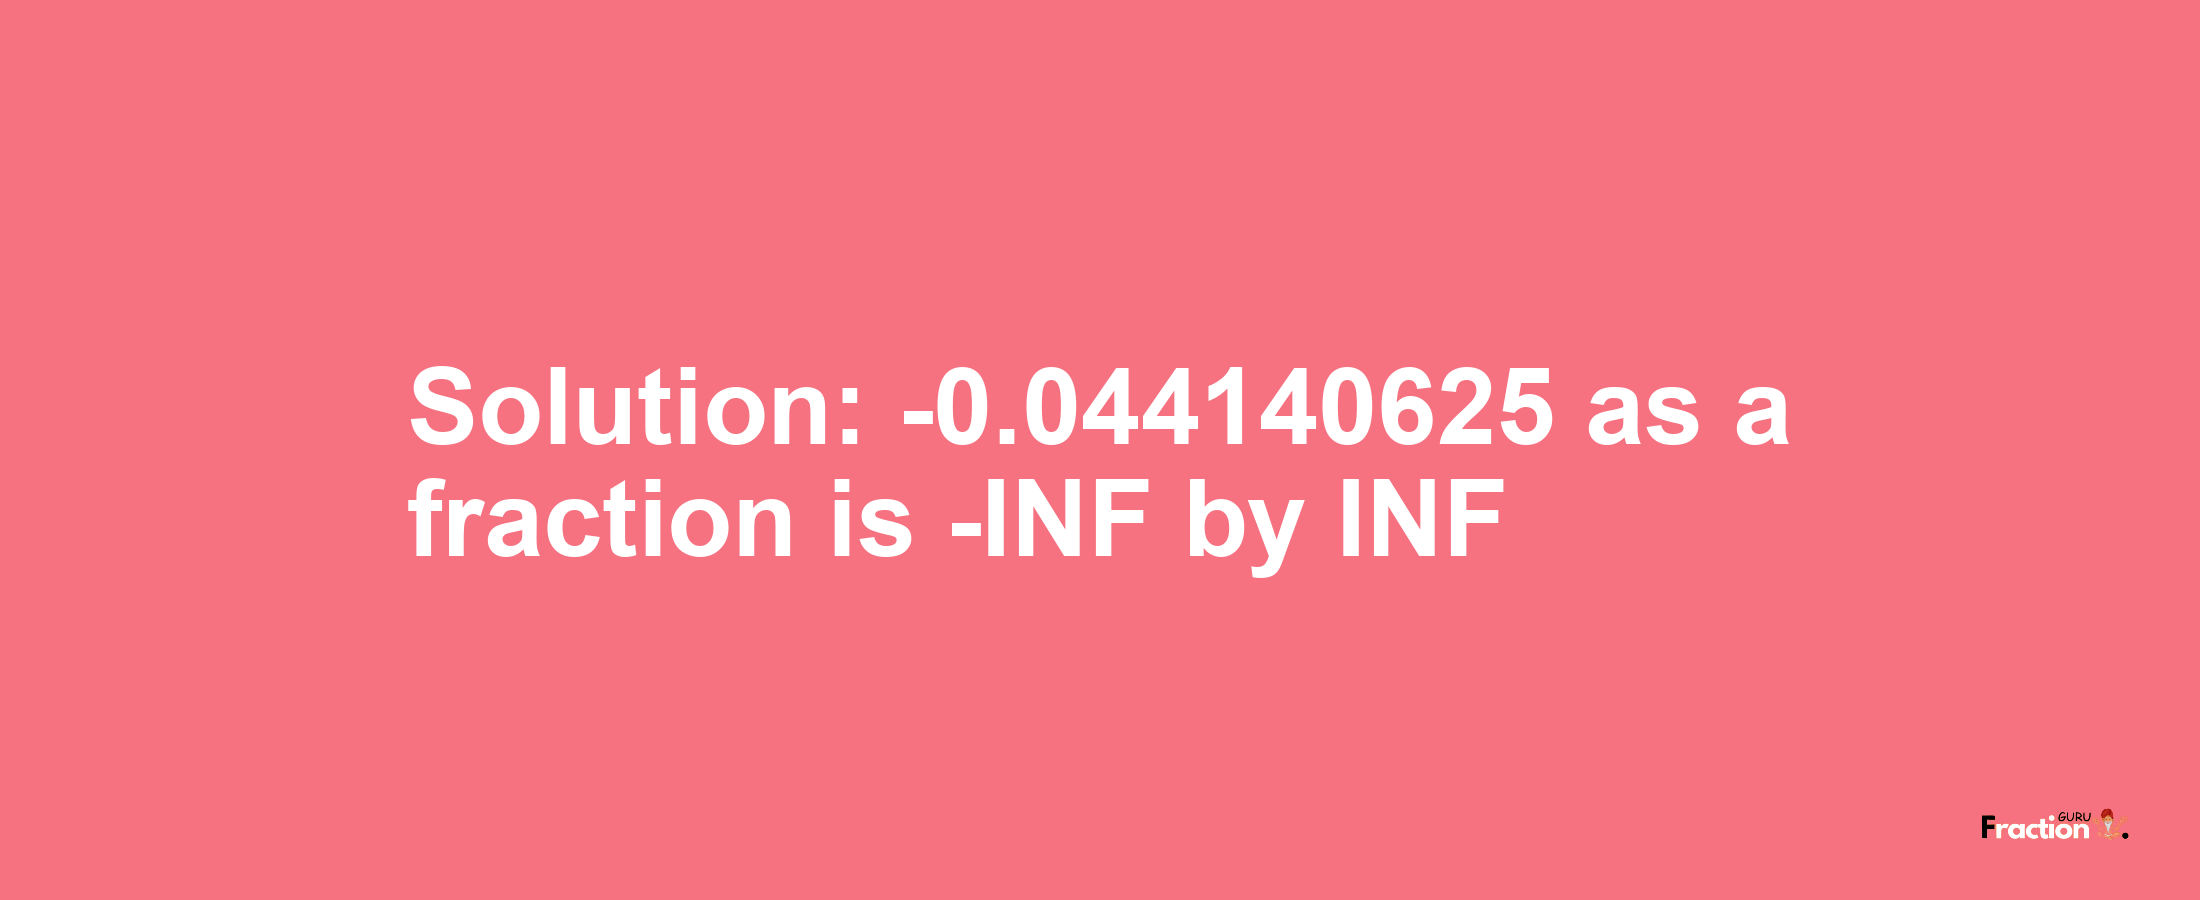 Solution:-0.044140625 as a fraction is -INF/INF